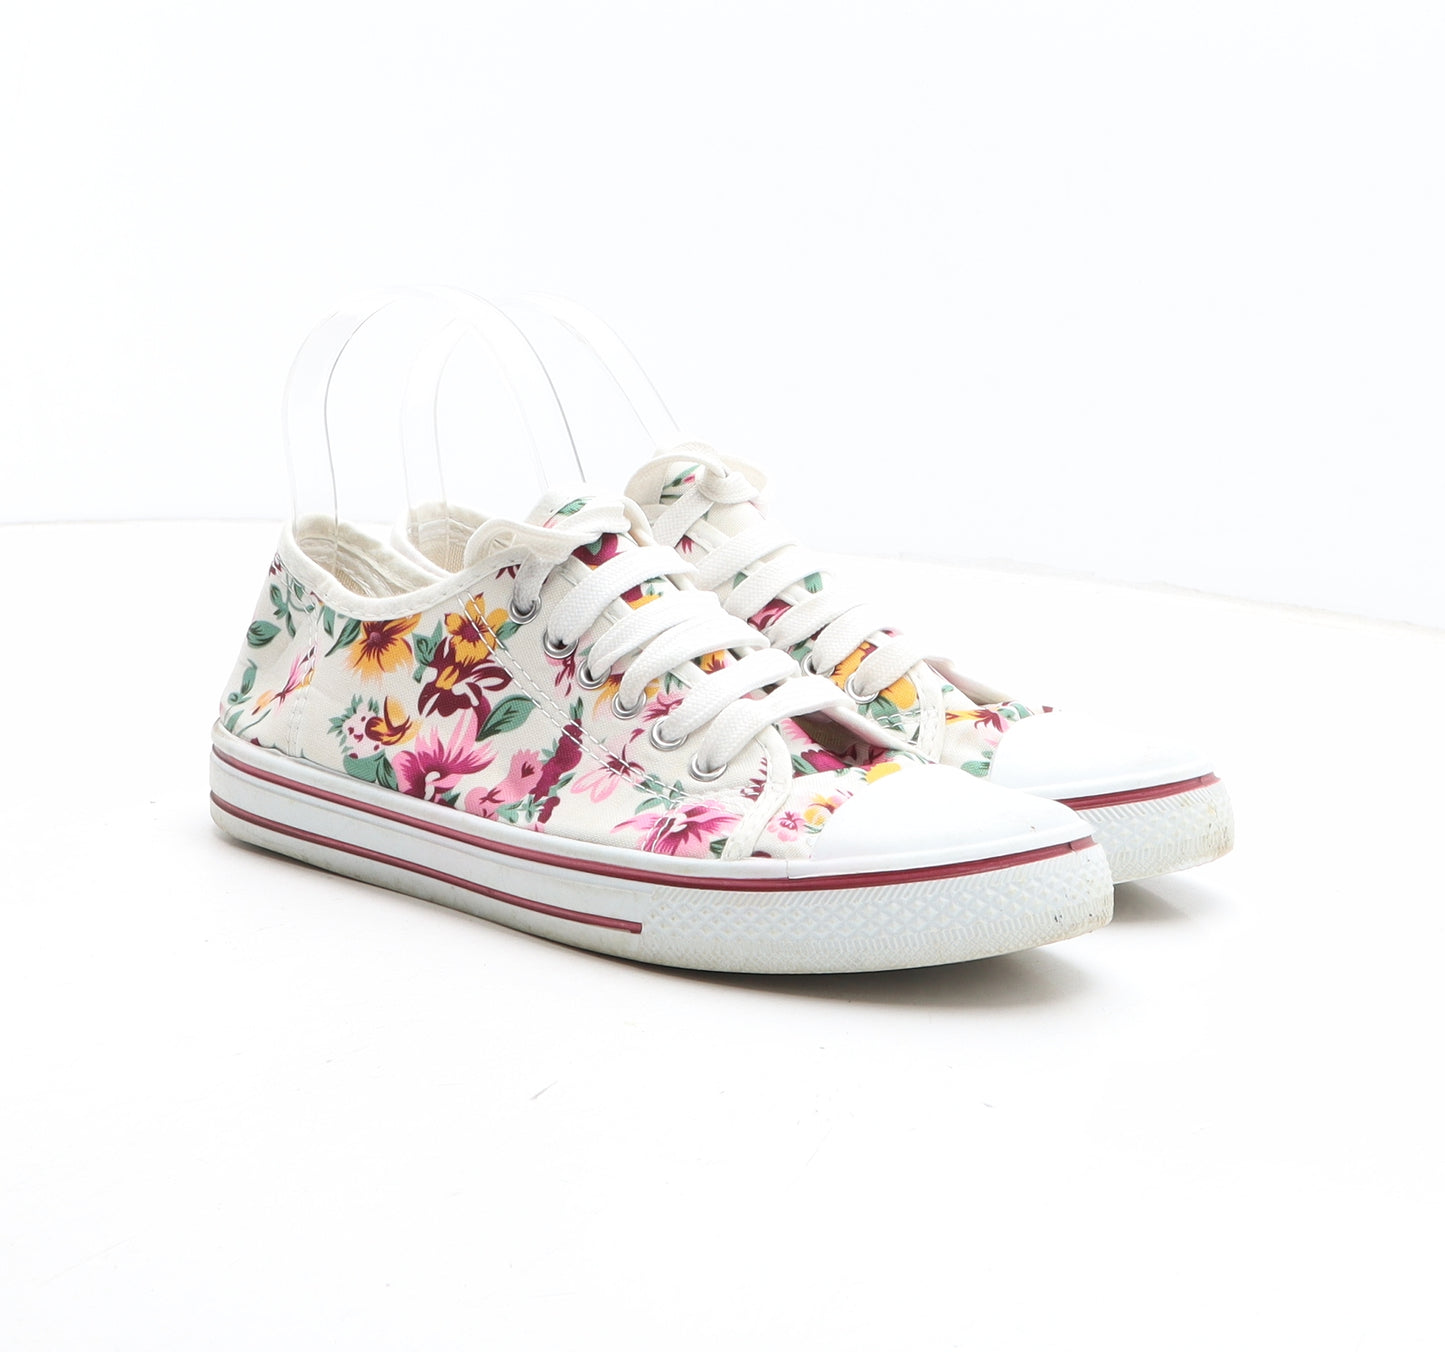 Lilley Womens Multicoloured Floral Fabric Trainer UK